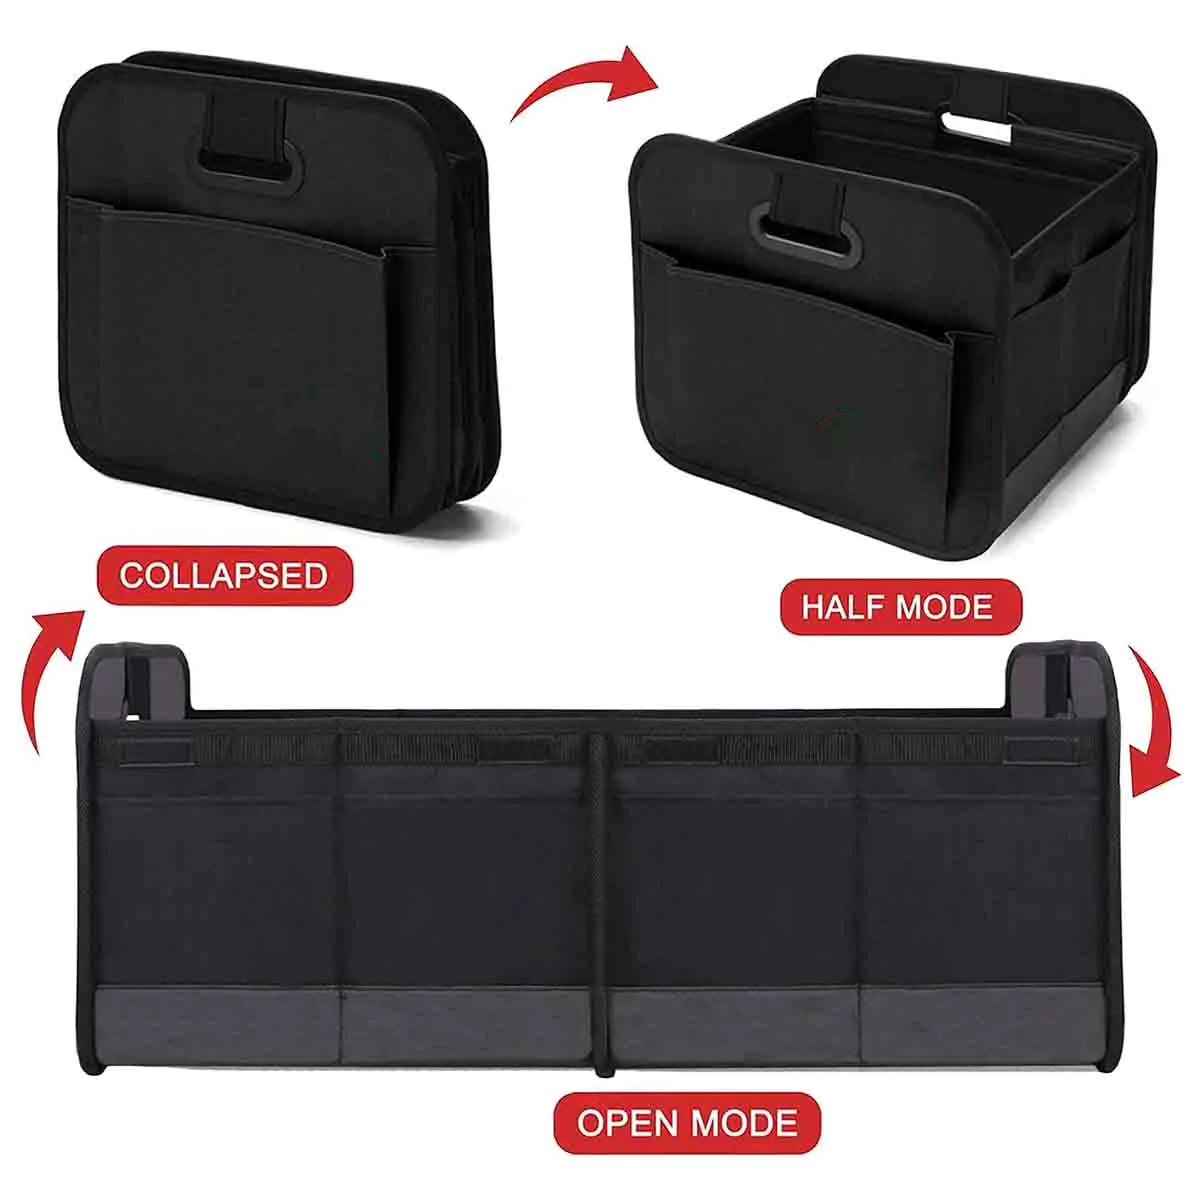 Custom Text For Car Trunk Organizer Storage, Compatible with All Cars, Reinforced Handles, Collapsible Multi, Compartment Car Organizers, Foldable and Waterproof, 600D Oxford Polyester JG12995